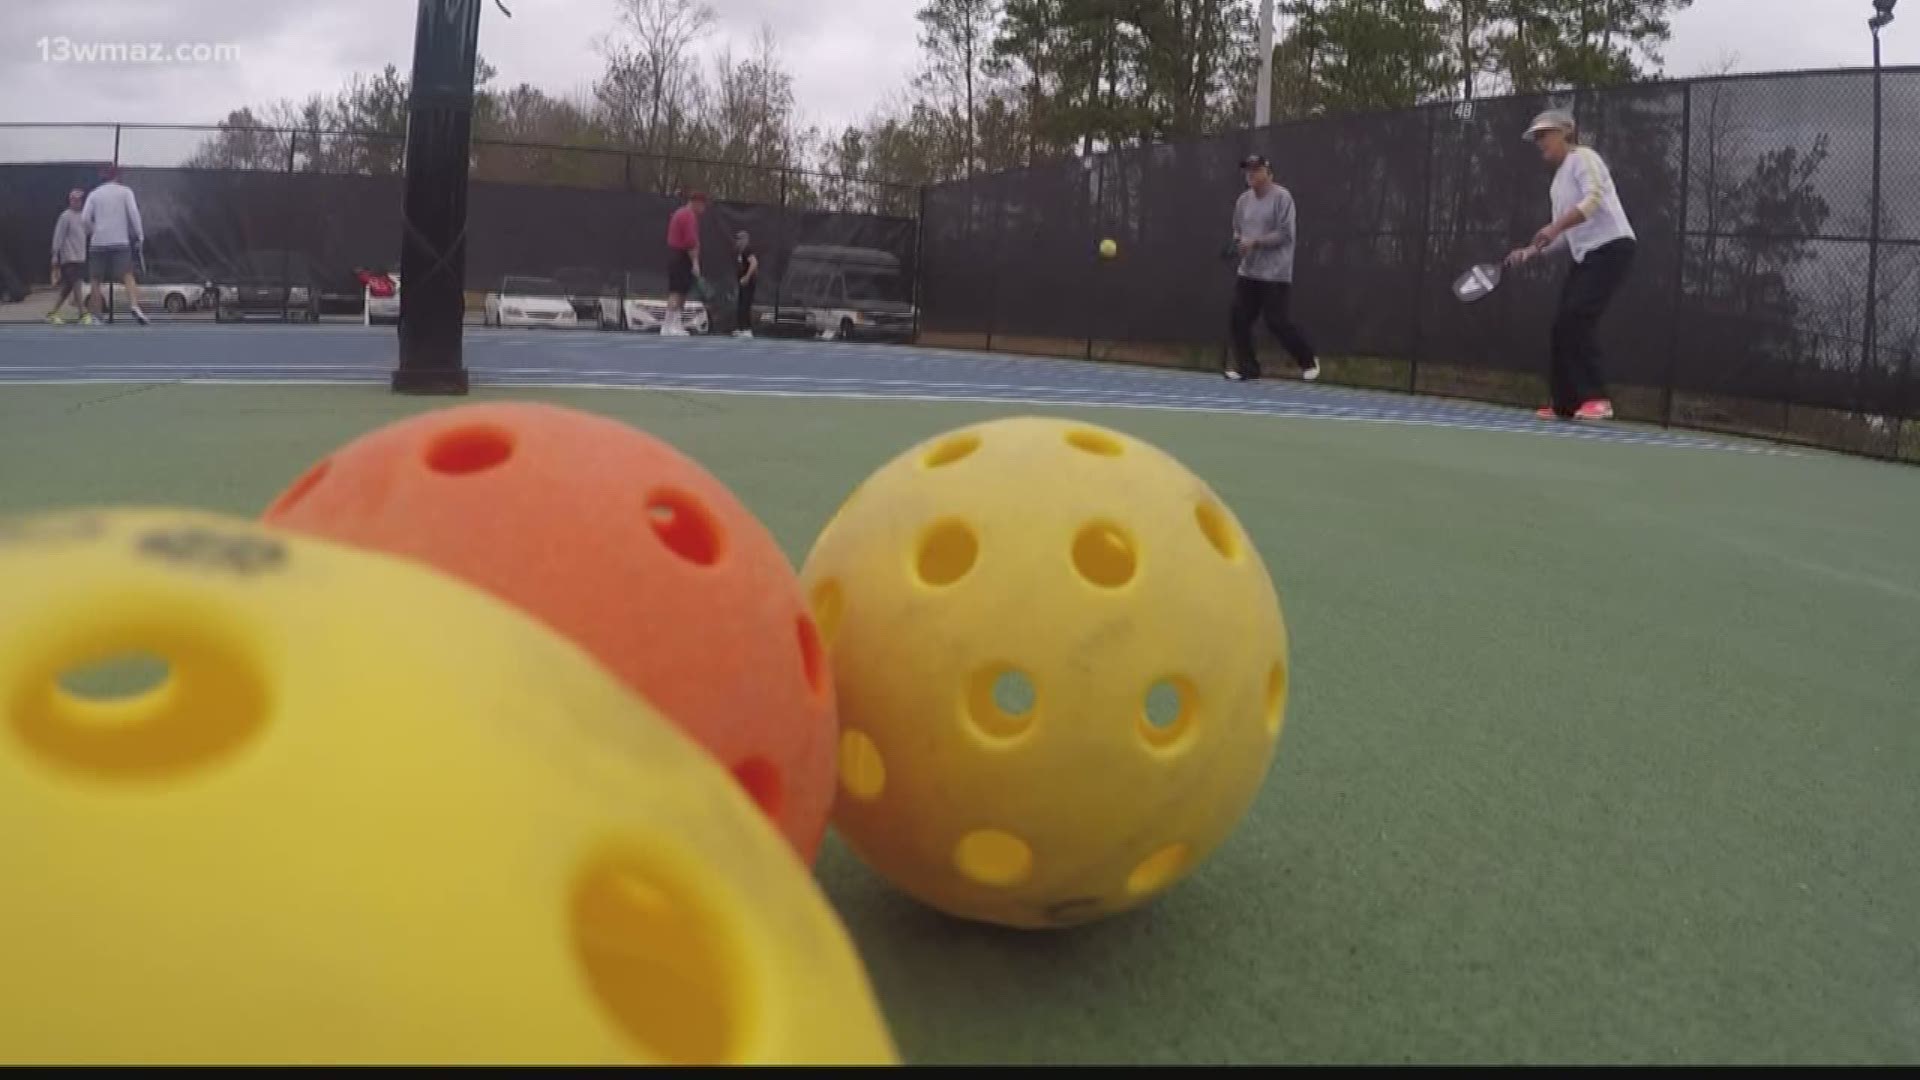 Pickleball is not a word you hear very often, but it is the name of a game gaining popularity across America and Central Georgia. Pickleball is a mix of ping pong, badminton, and tennis.